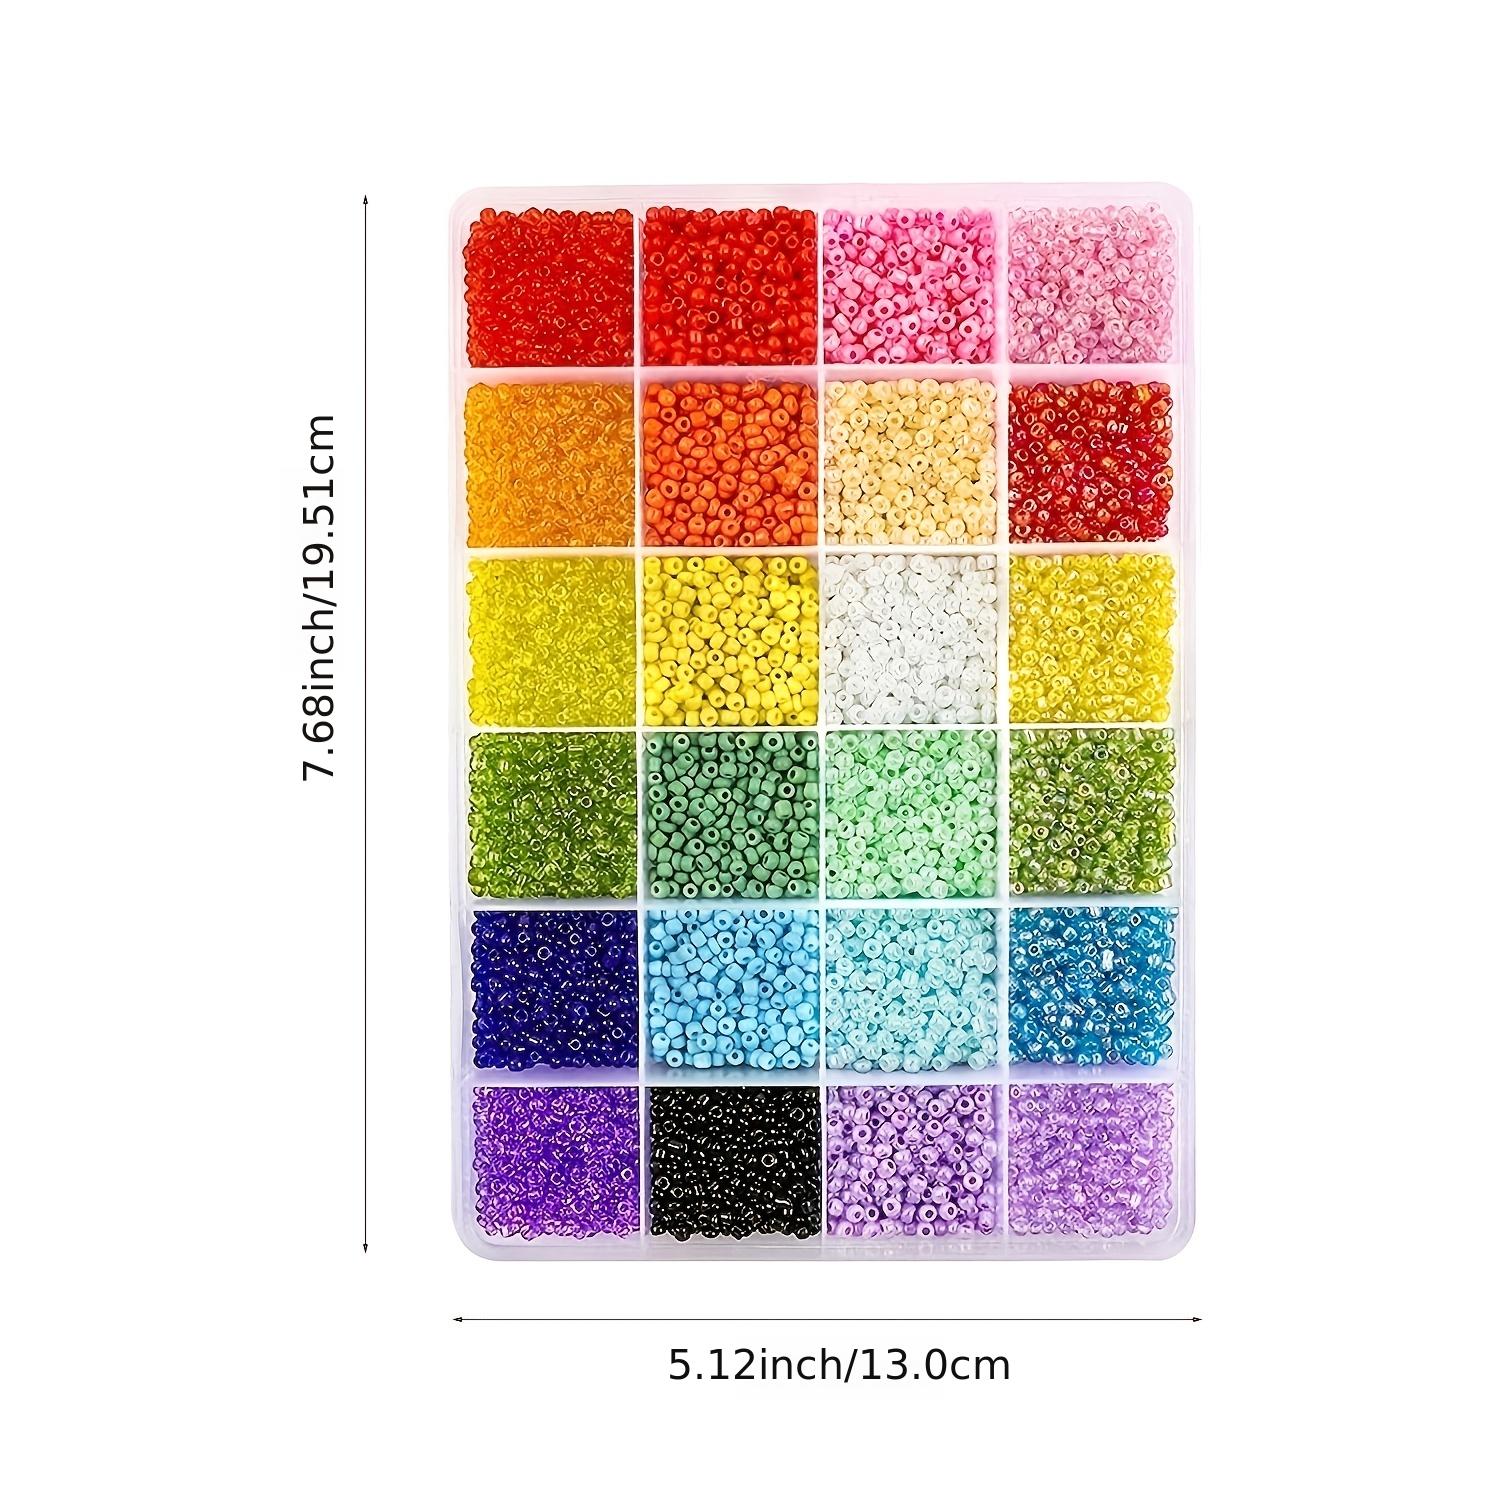 DICOBD Craft Beads Kit 10800pcs 3mm Glass Seed Beads and 1200pcs Letter Beads  for Friendship Bracelets Jewelry Making Necklaces and Key Chains with 2  Rolls of Cord 